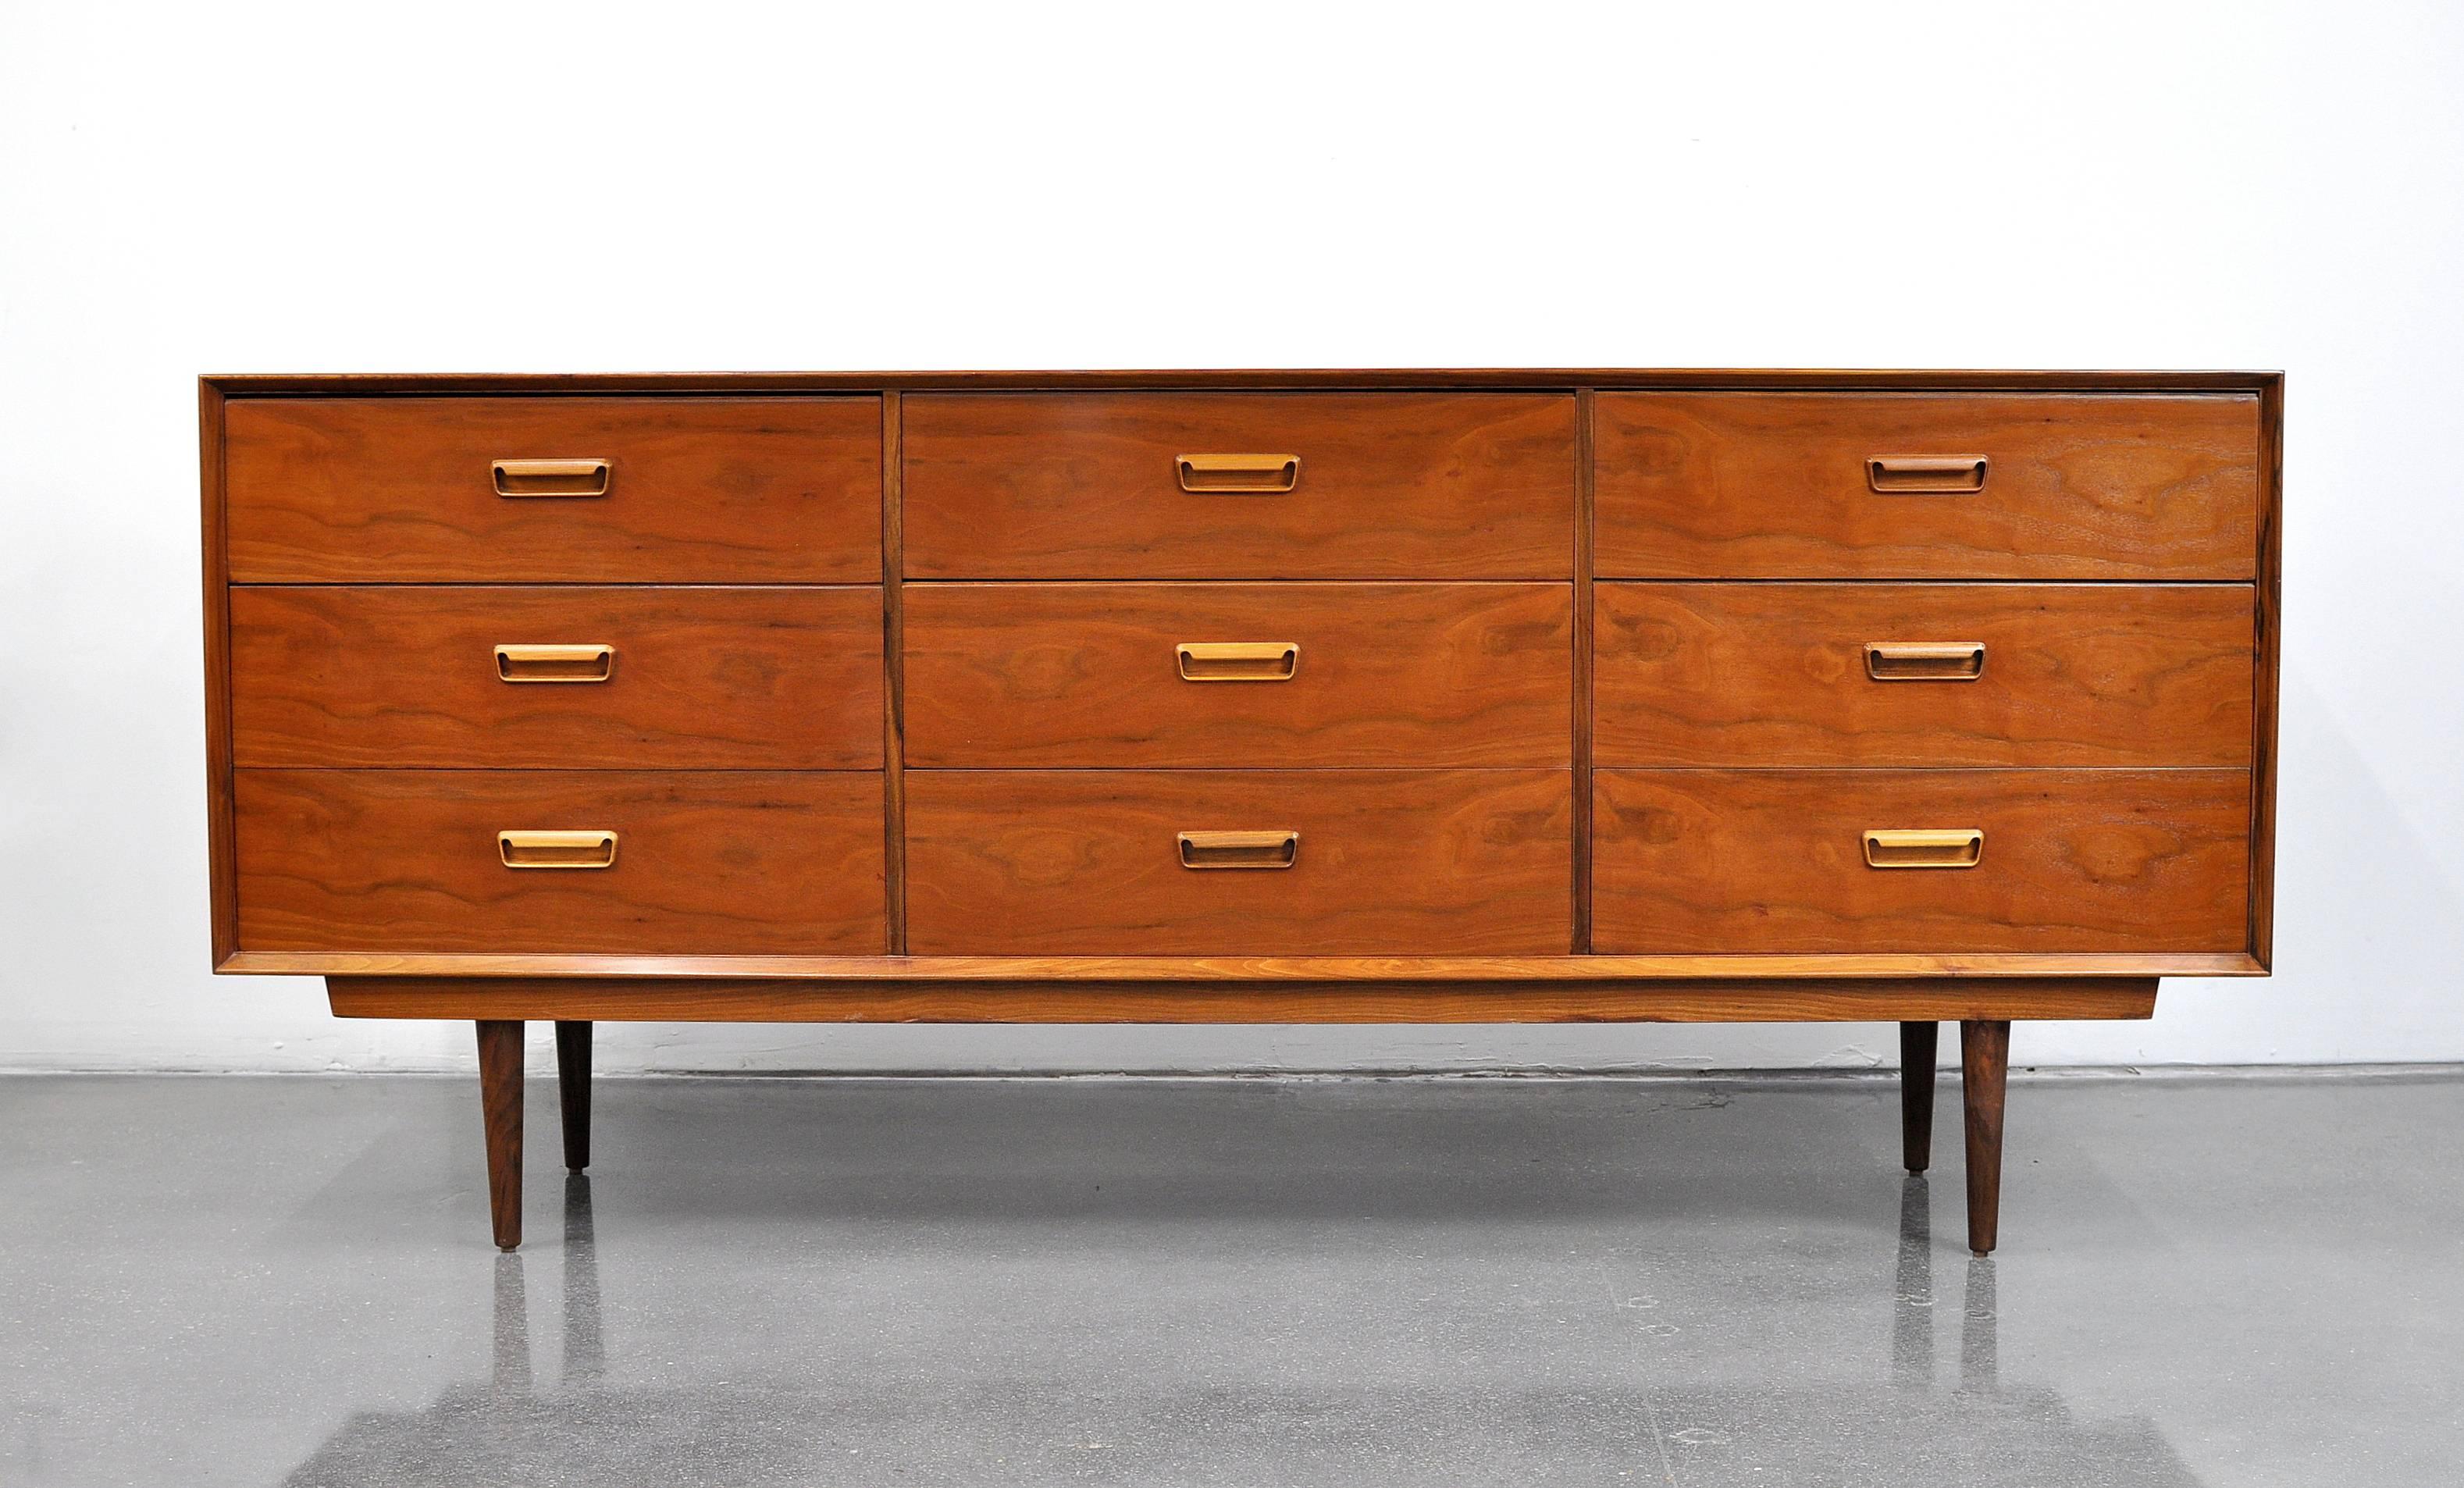 A stunning midcentury Danish modern vintage rosewood bedroom set with a triple dresser and a pair of nightstands, dating from the 1960s. Professionally refinished, the credenza and the side tables have finished backs with gorgeous wood grain,